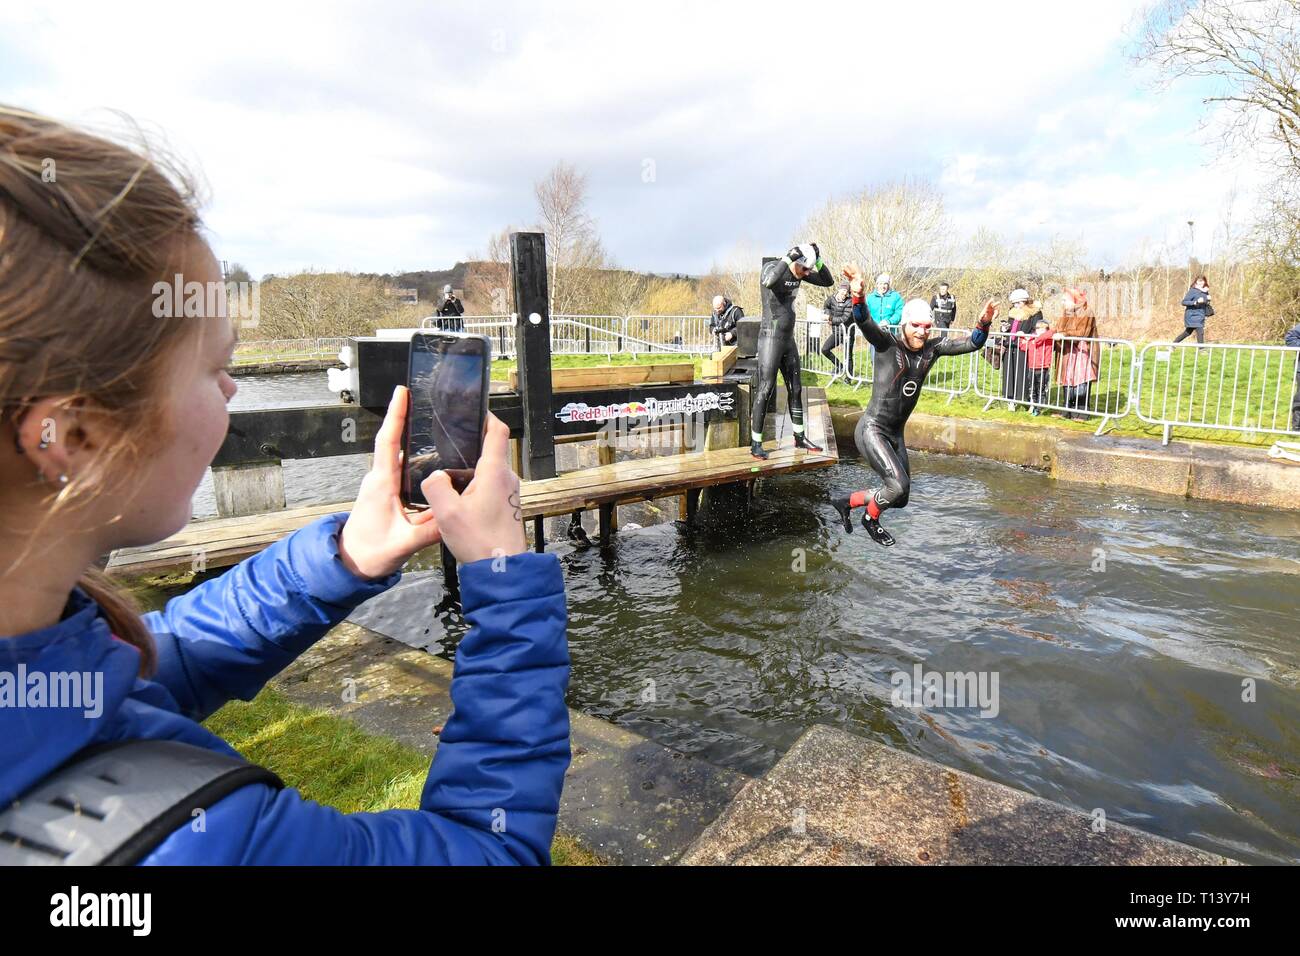 Maryhill, Glasgow, Scotland, UK. 23rd Mar, 2019. uk weather - determined competitors braving 8 degree water temperatures at the Red Bull Neptune Steps swim/climb adventure race at Maryhill Locks, Glasgow. The annual extreme event involves swimming 400 m of cold water and climbing 18 metres over 7 canal lock gates Credit: Kay Roxby/Alamy Live News Stock Photo